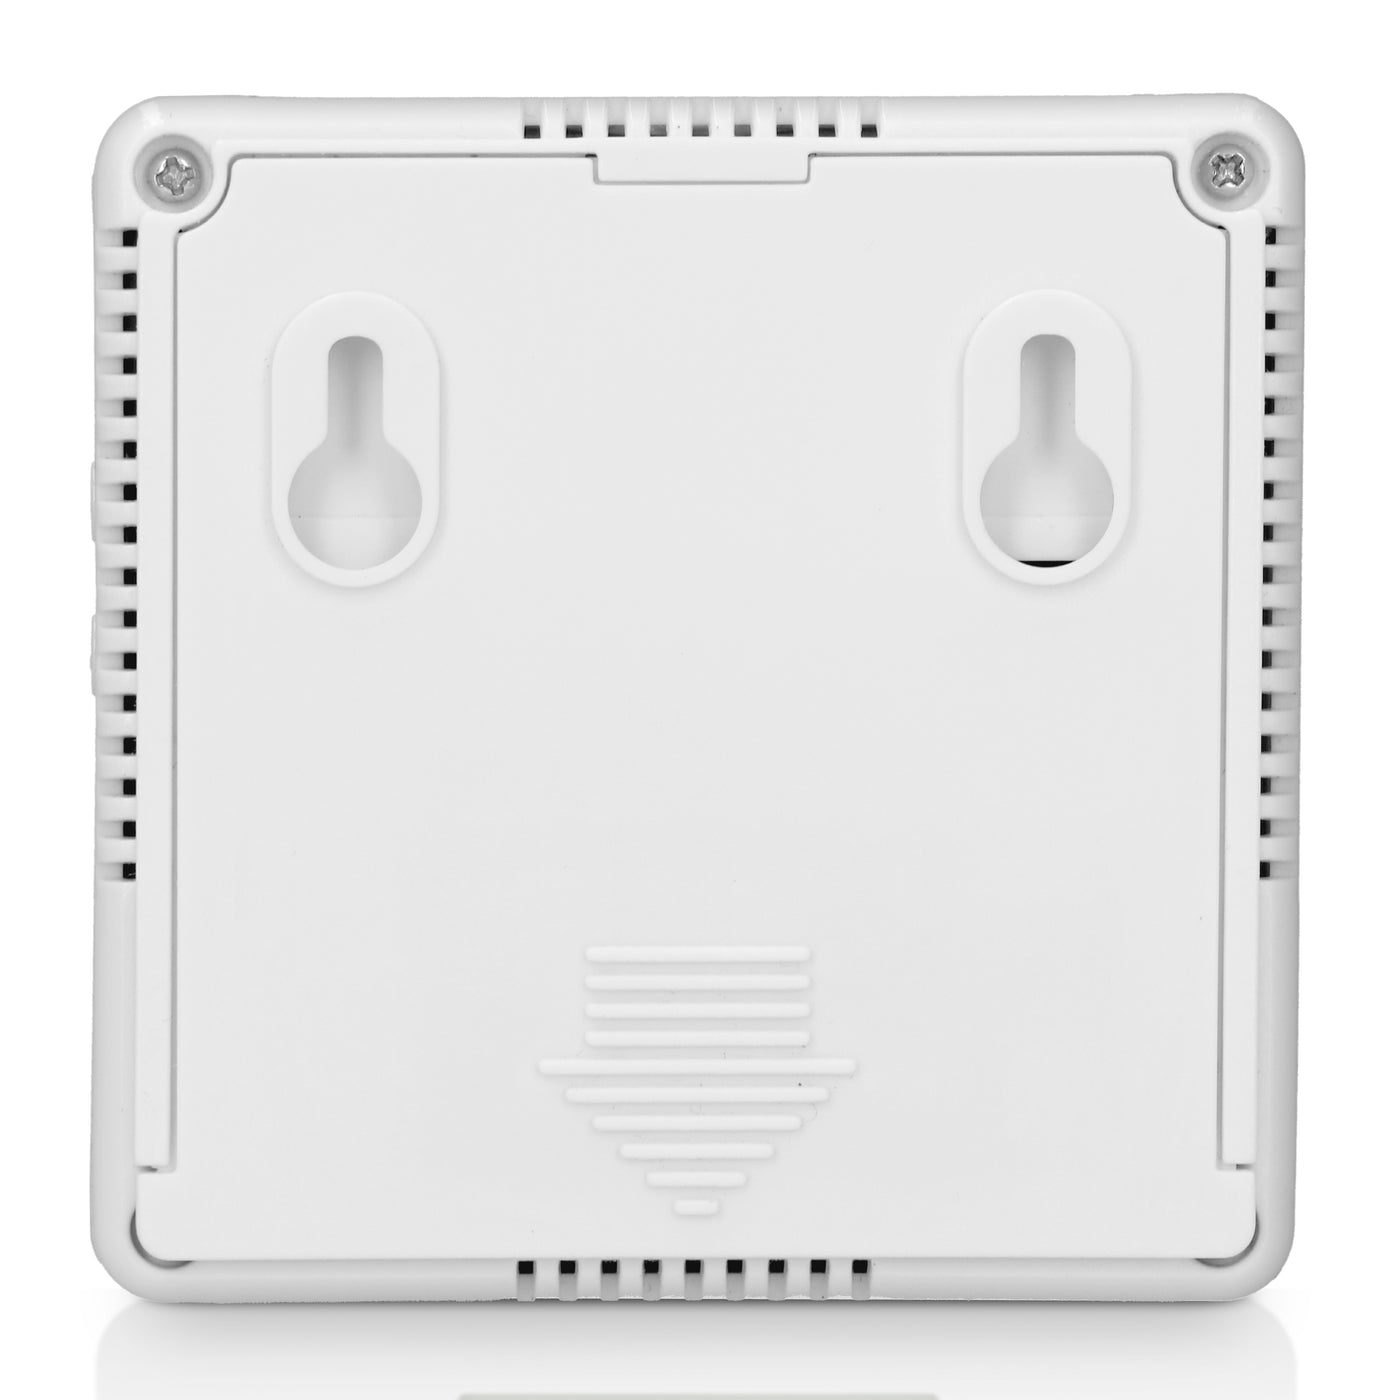 Alecto COA26 - Low level carbon monoxide alarm (>5ppm) with 10 years sensor runtime and temperature display, white